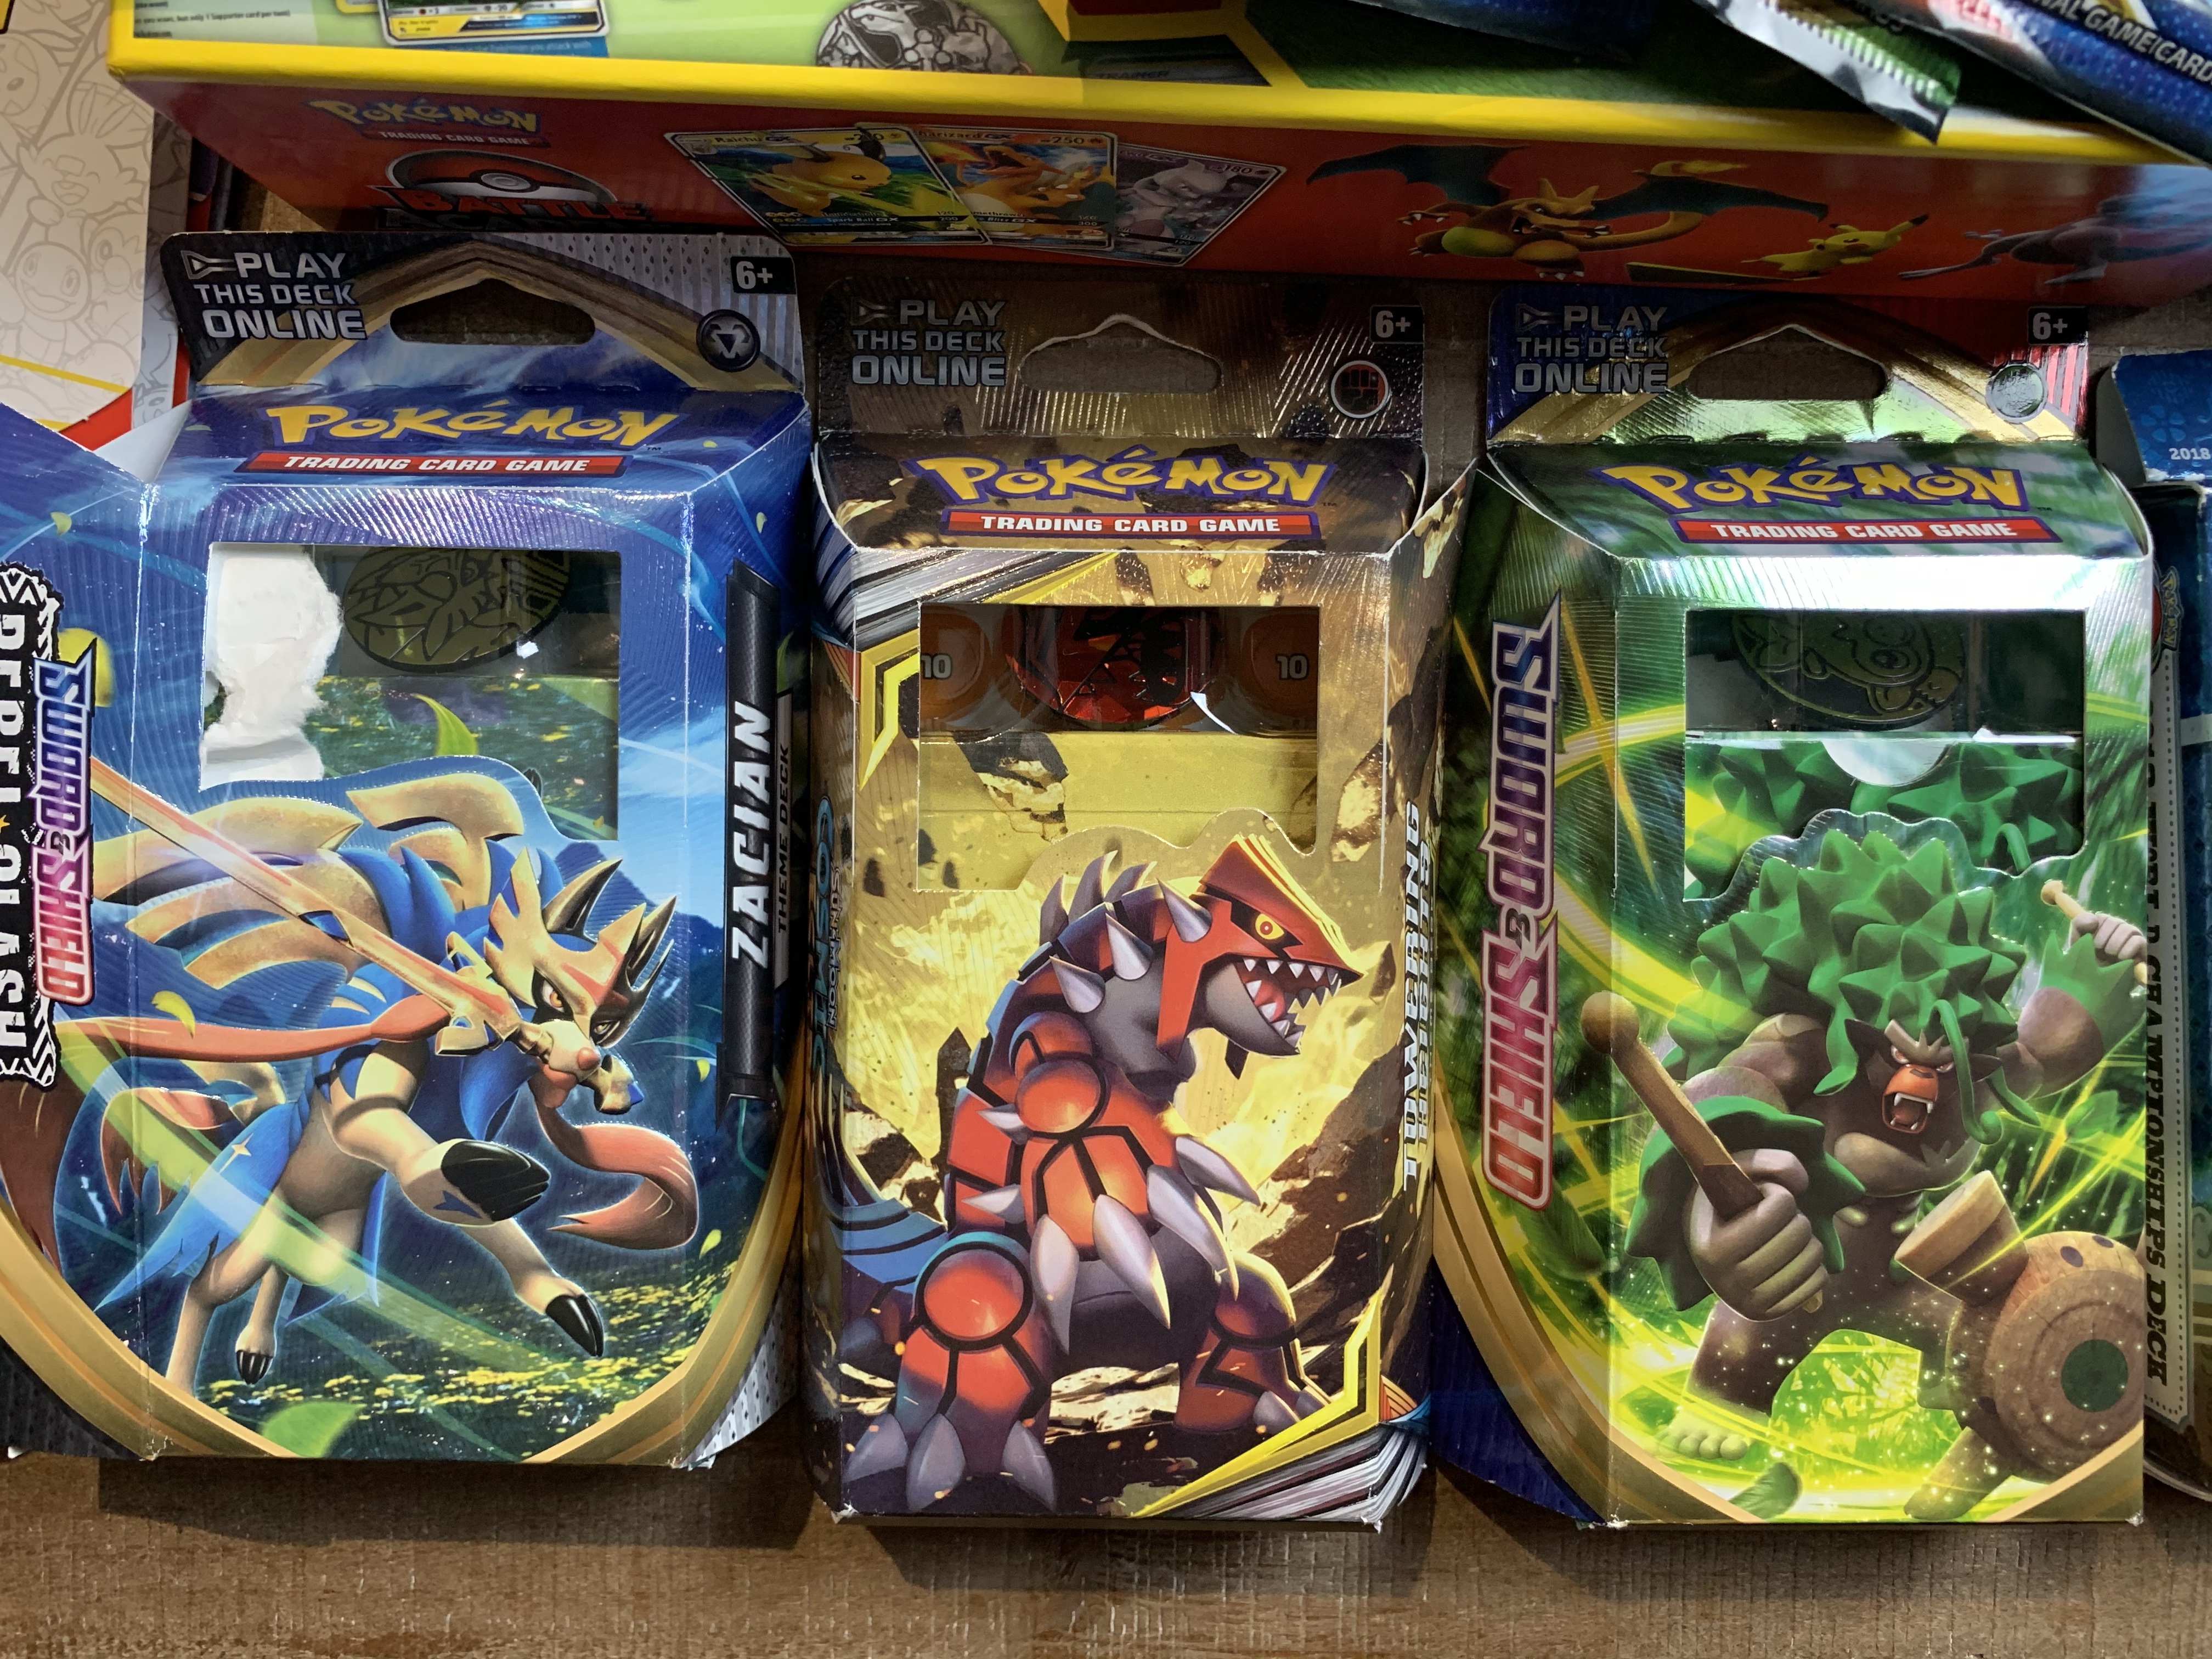 What You Need to Know About Pokemon Trading Card Game Decks, Battle Decks, League Battle Decks, More – In Third Person